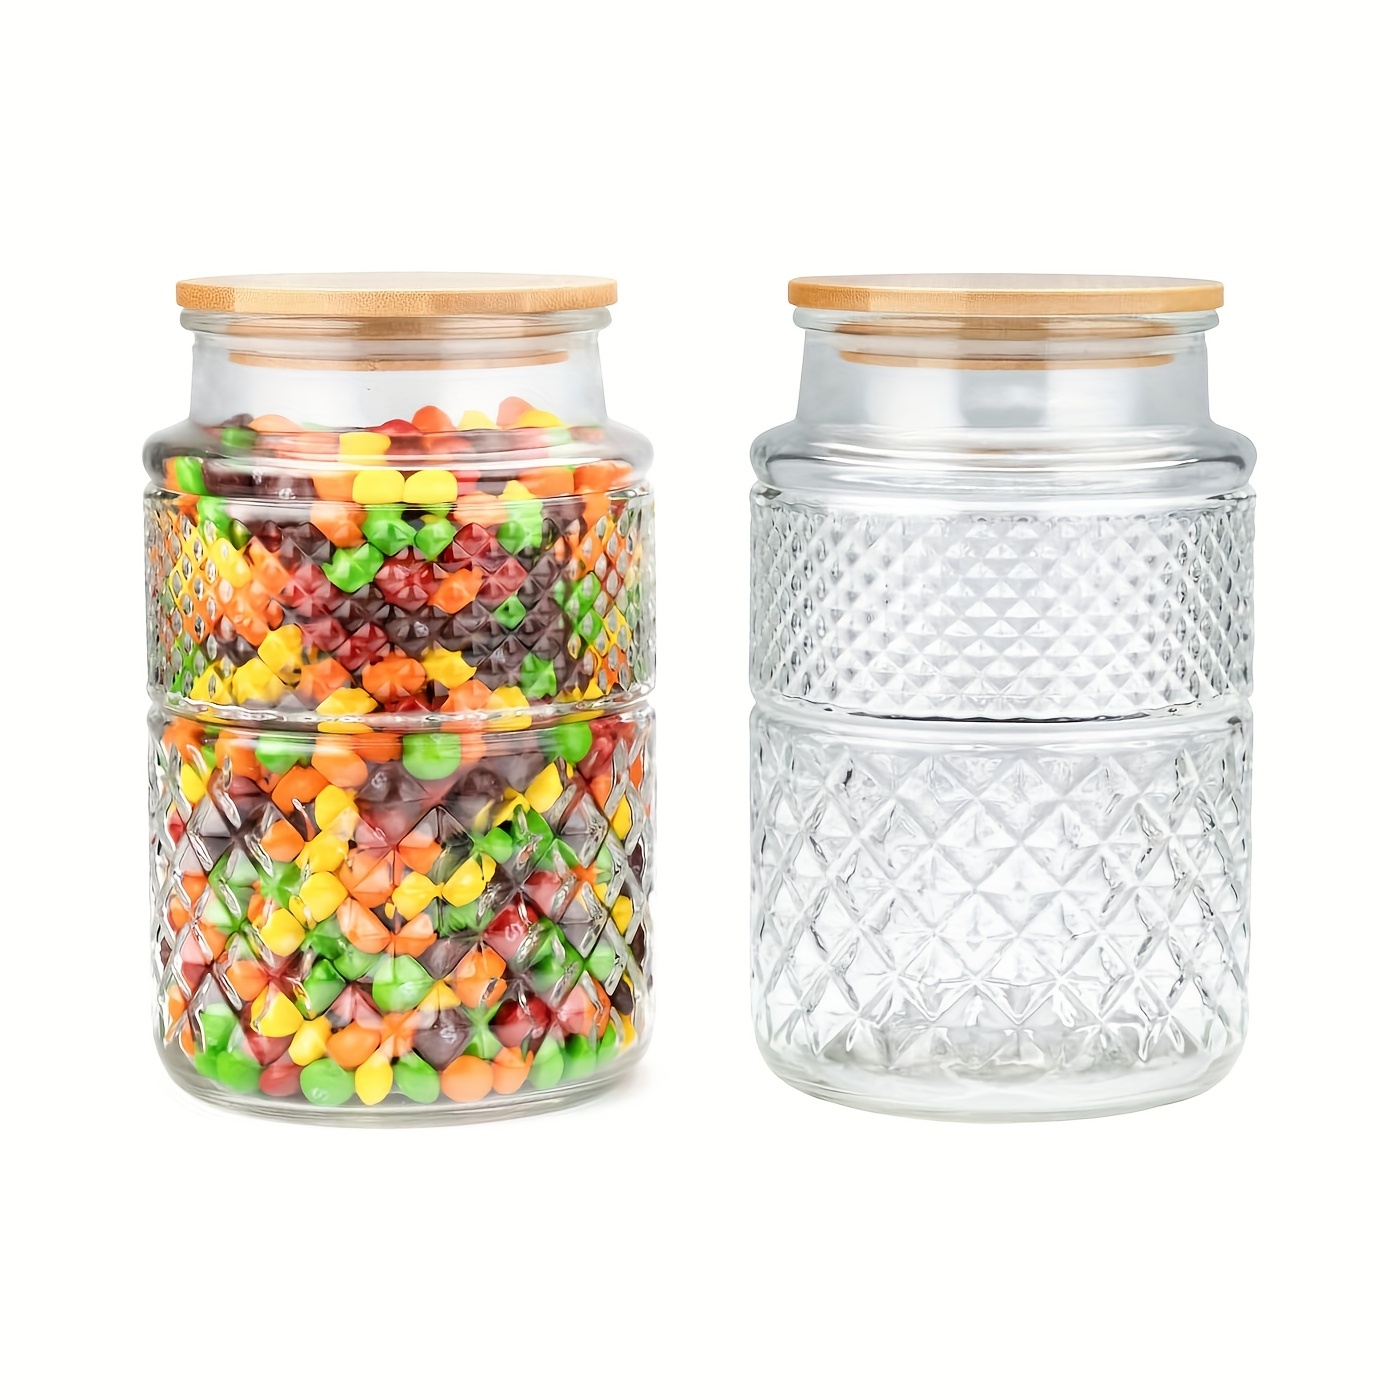 Candy Storage Jar, Decorative Glass Jar, Buffet Cookie Jar, With  Transparent Glass Cover,round Handle, For Storage Of Candies, Dried Fruits,  Jewelry